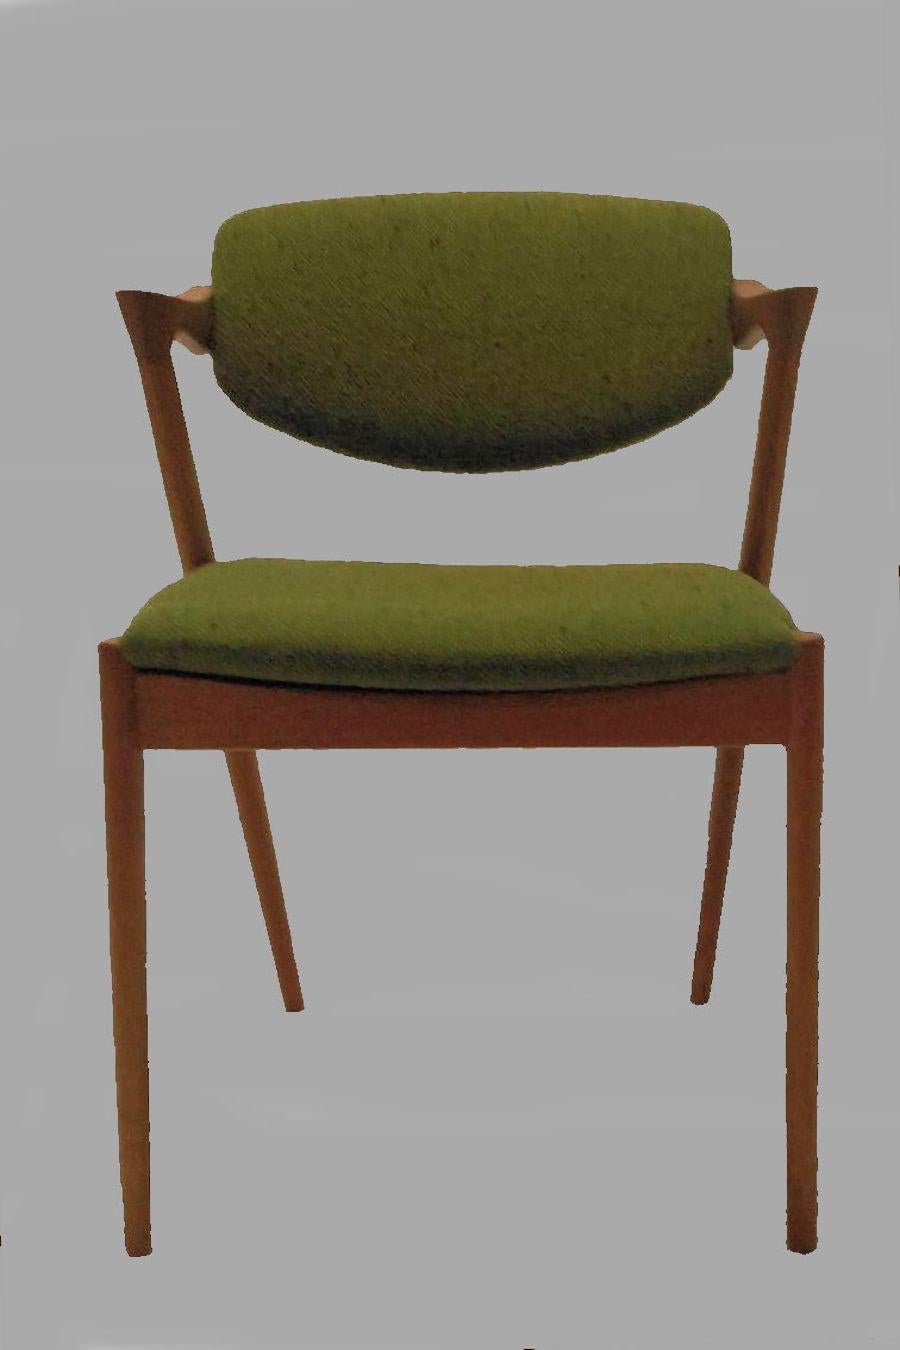 Set of 10 restored model 42 oak dining chairs with adjustable backrest by Kai Kristiansen for Schous Møbelfabrik.

The chairs have Kai Kristiansens typical light and elegant design that make them fit in easily where you want them in your home - a